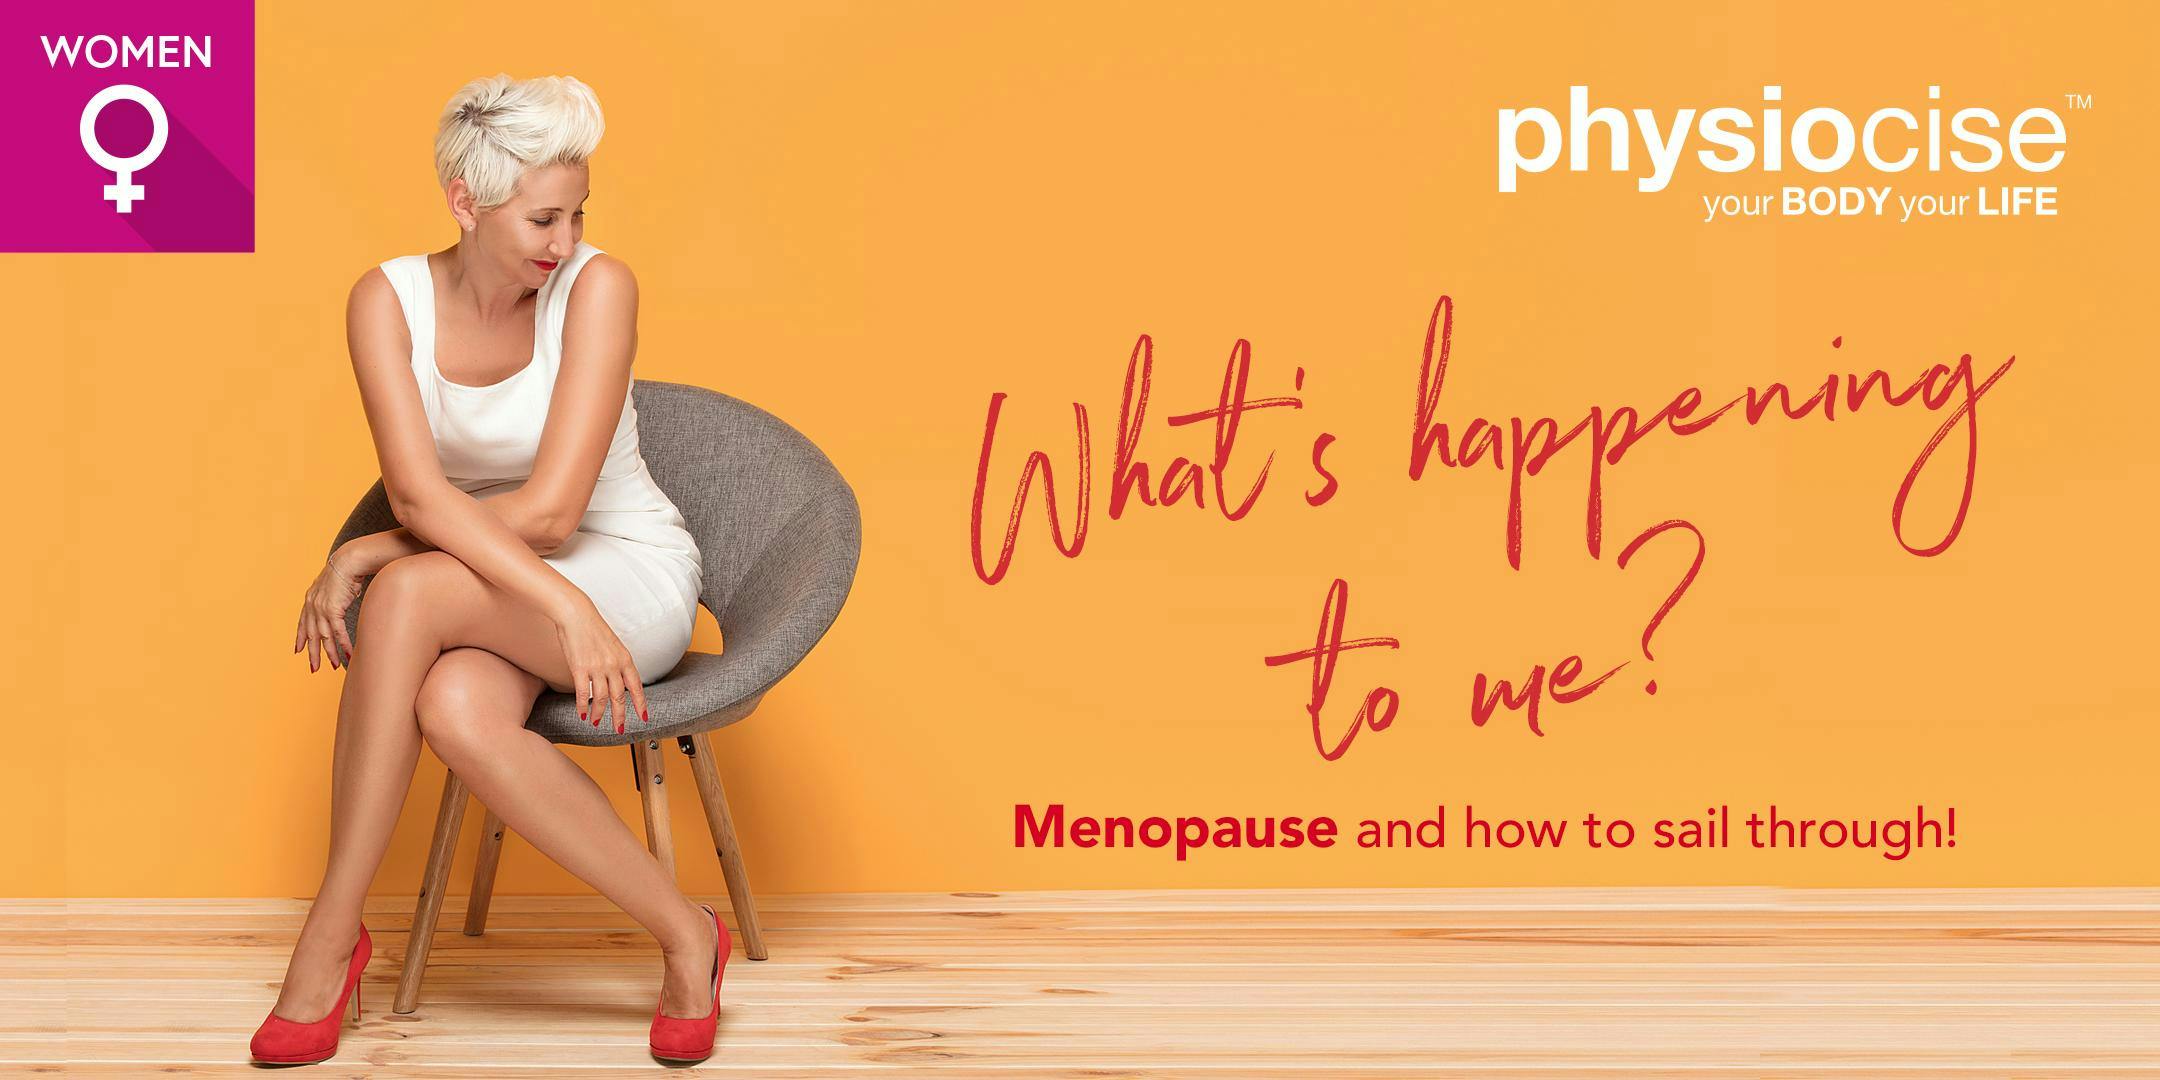 What's happening to me? Menopause and how to sail through!